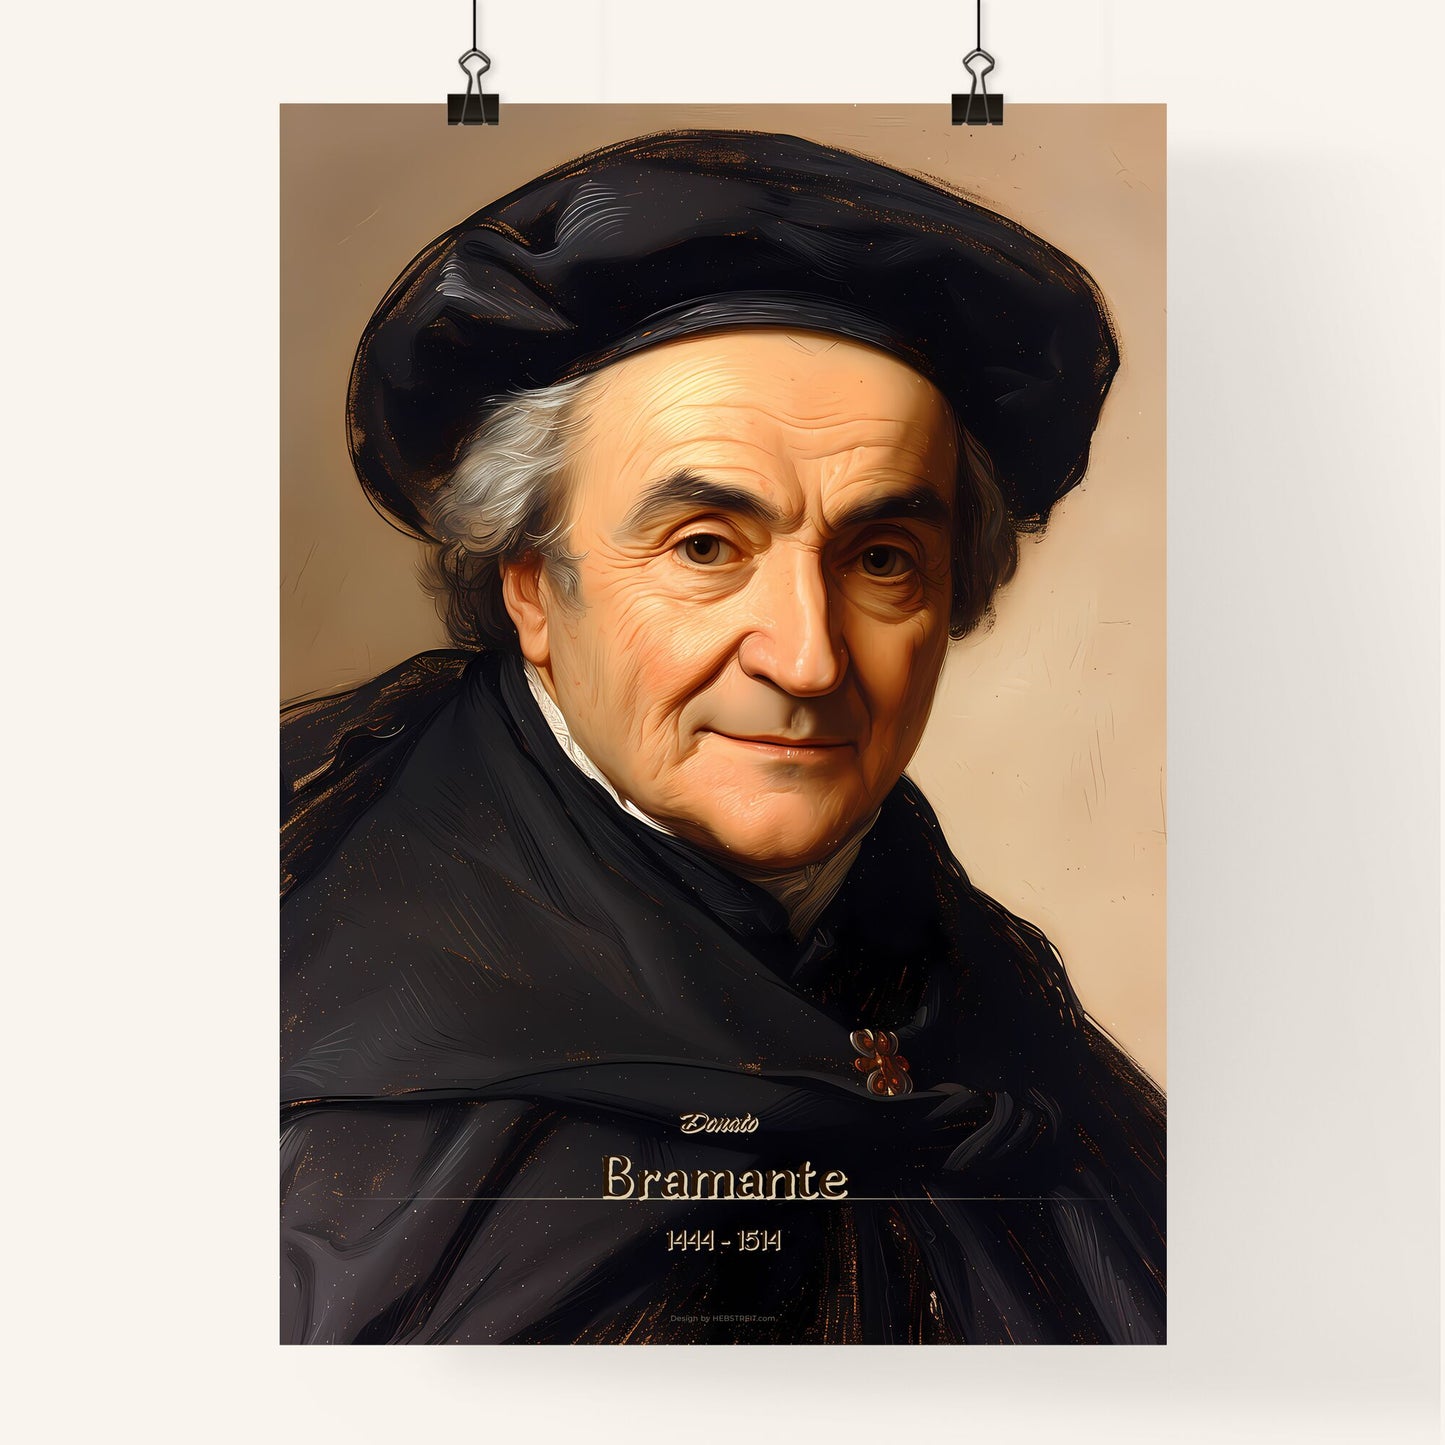 Donato, Bramante, 1444 - 1514, A Poster of a man wearing a black hat and cape Default Title